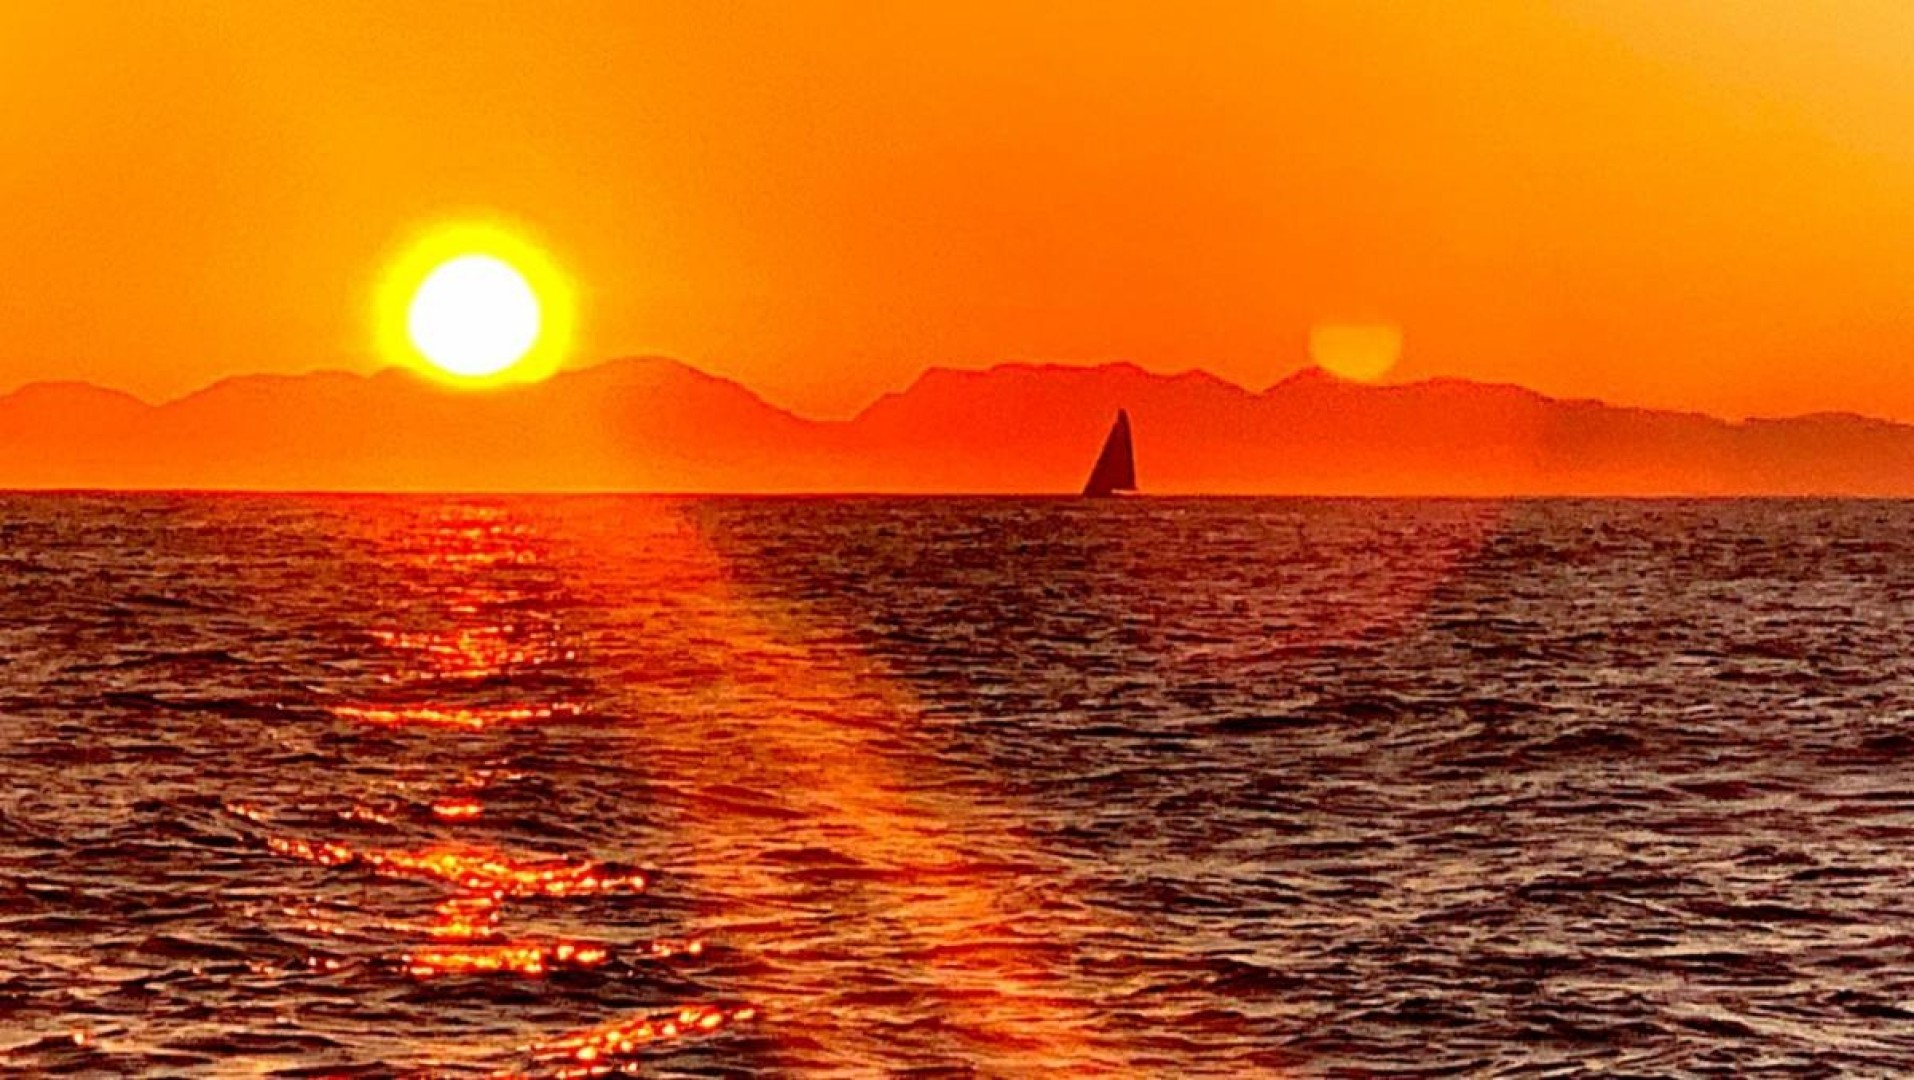 There's been joy & pain on assent to Muckle Flugga in the Sevenstar Round Britain and Ireland Race - but spectacular rewards too!

This sunset shot was sent to the media team a few days ago by Jangada of Wild Pilgrim off Slyne Head © Richard Palmer/Jangada